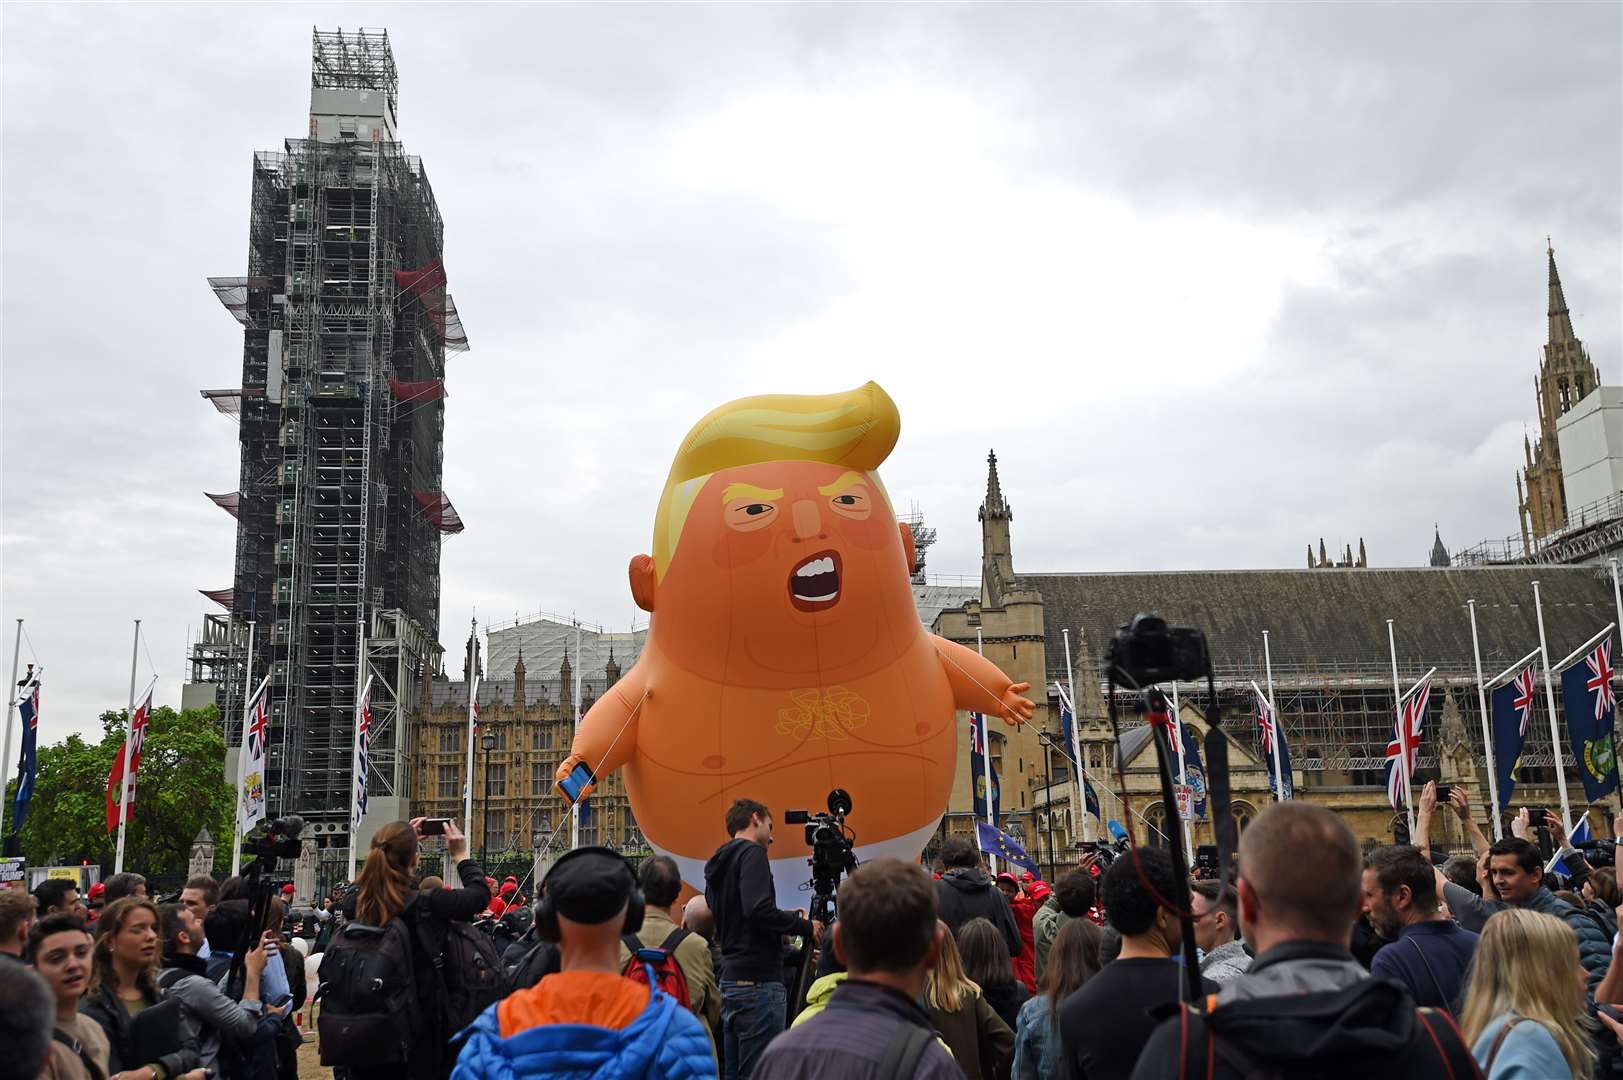 Members of the Baby Trump Balloon team set up in Parliament Square (David Mirzoeff/PA)